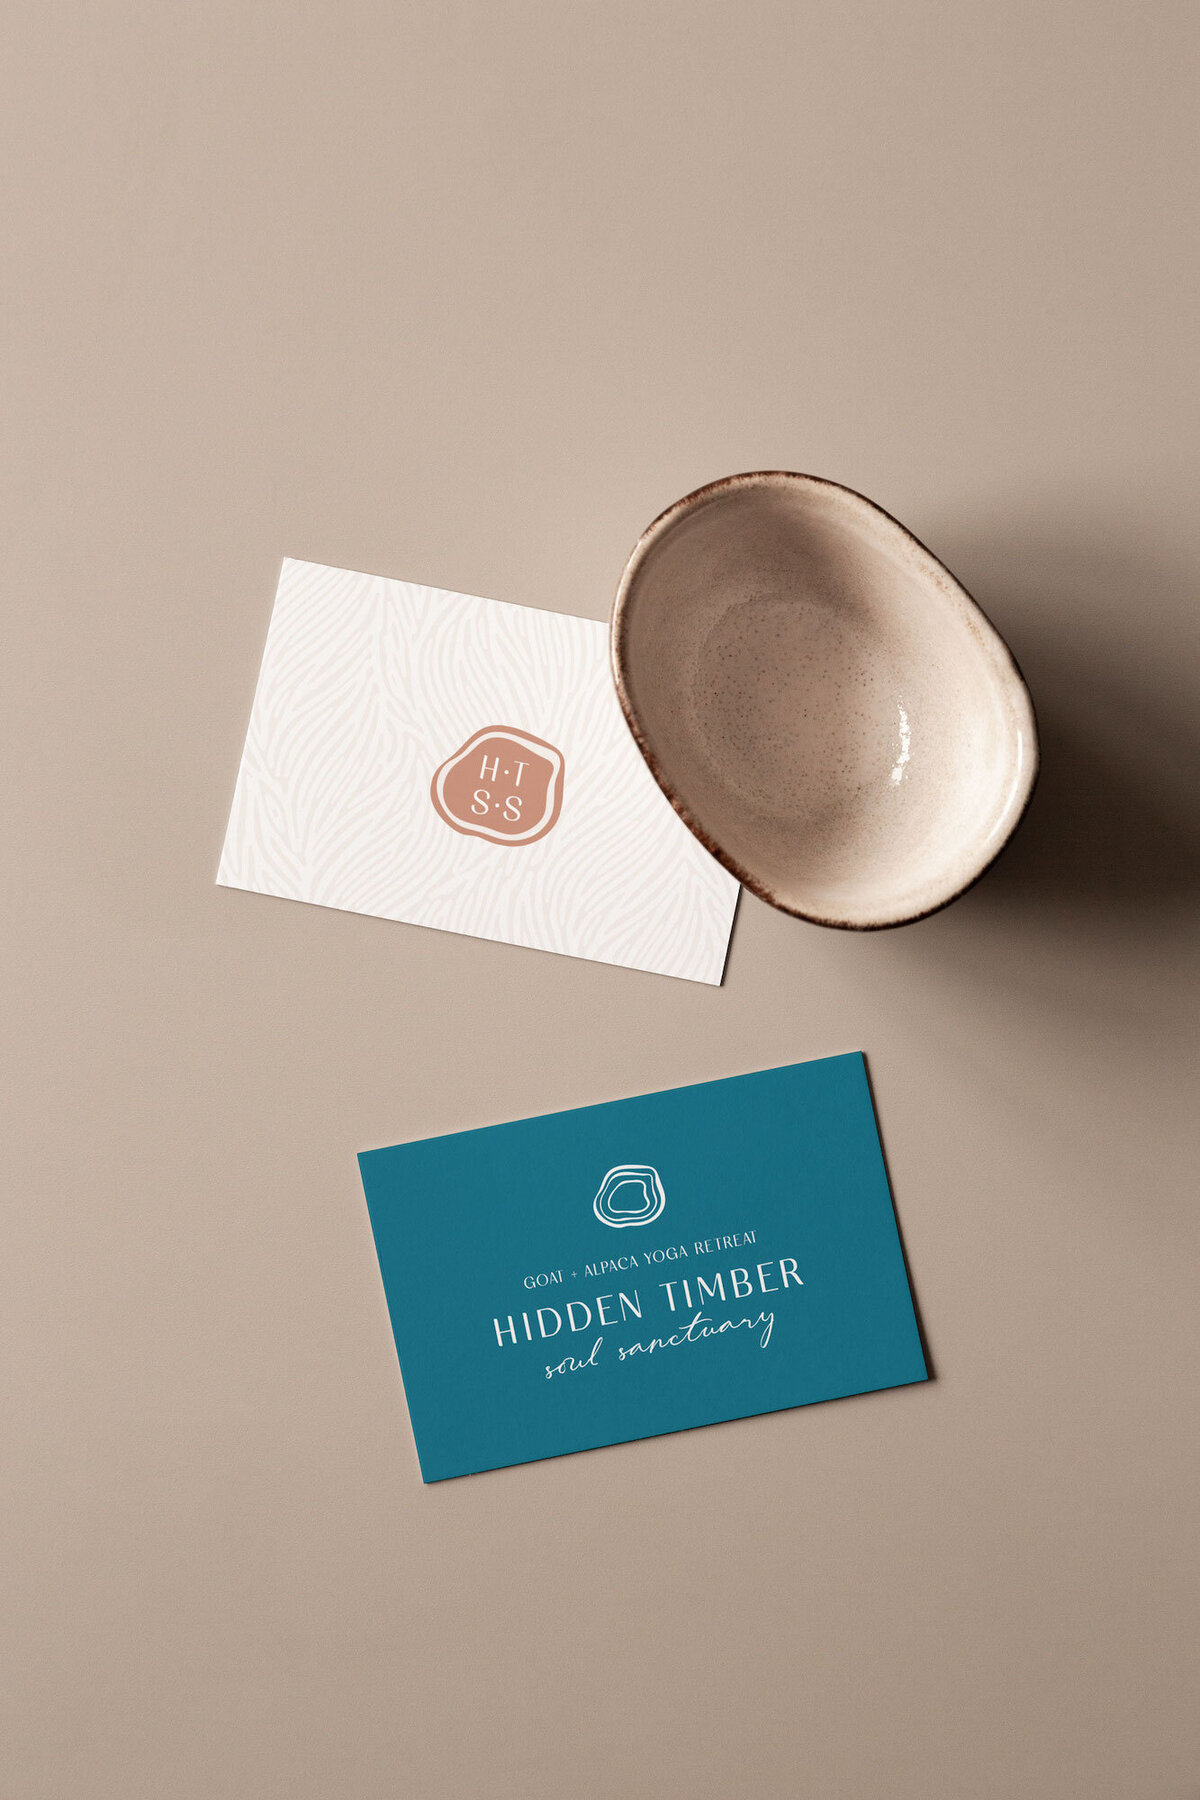 Branded business cards for with simple icon and leaf pattern